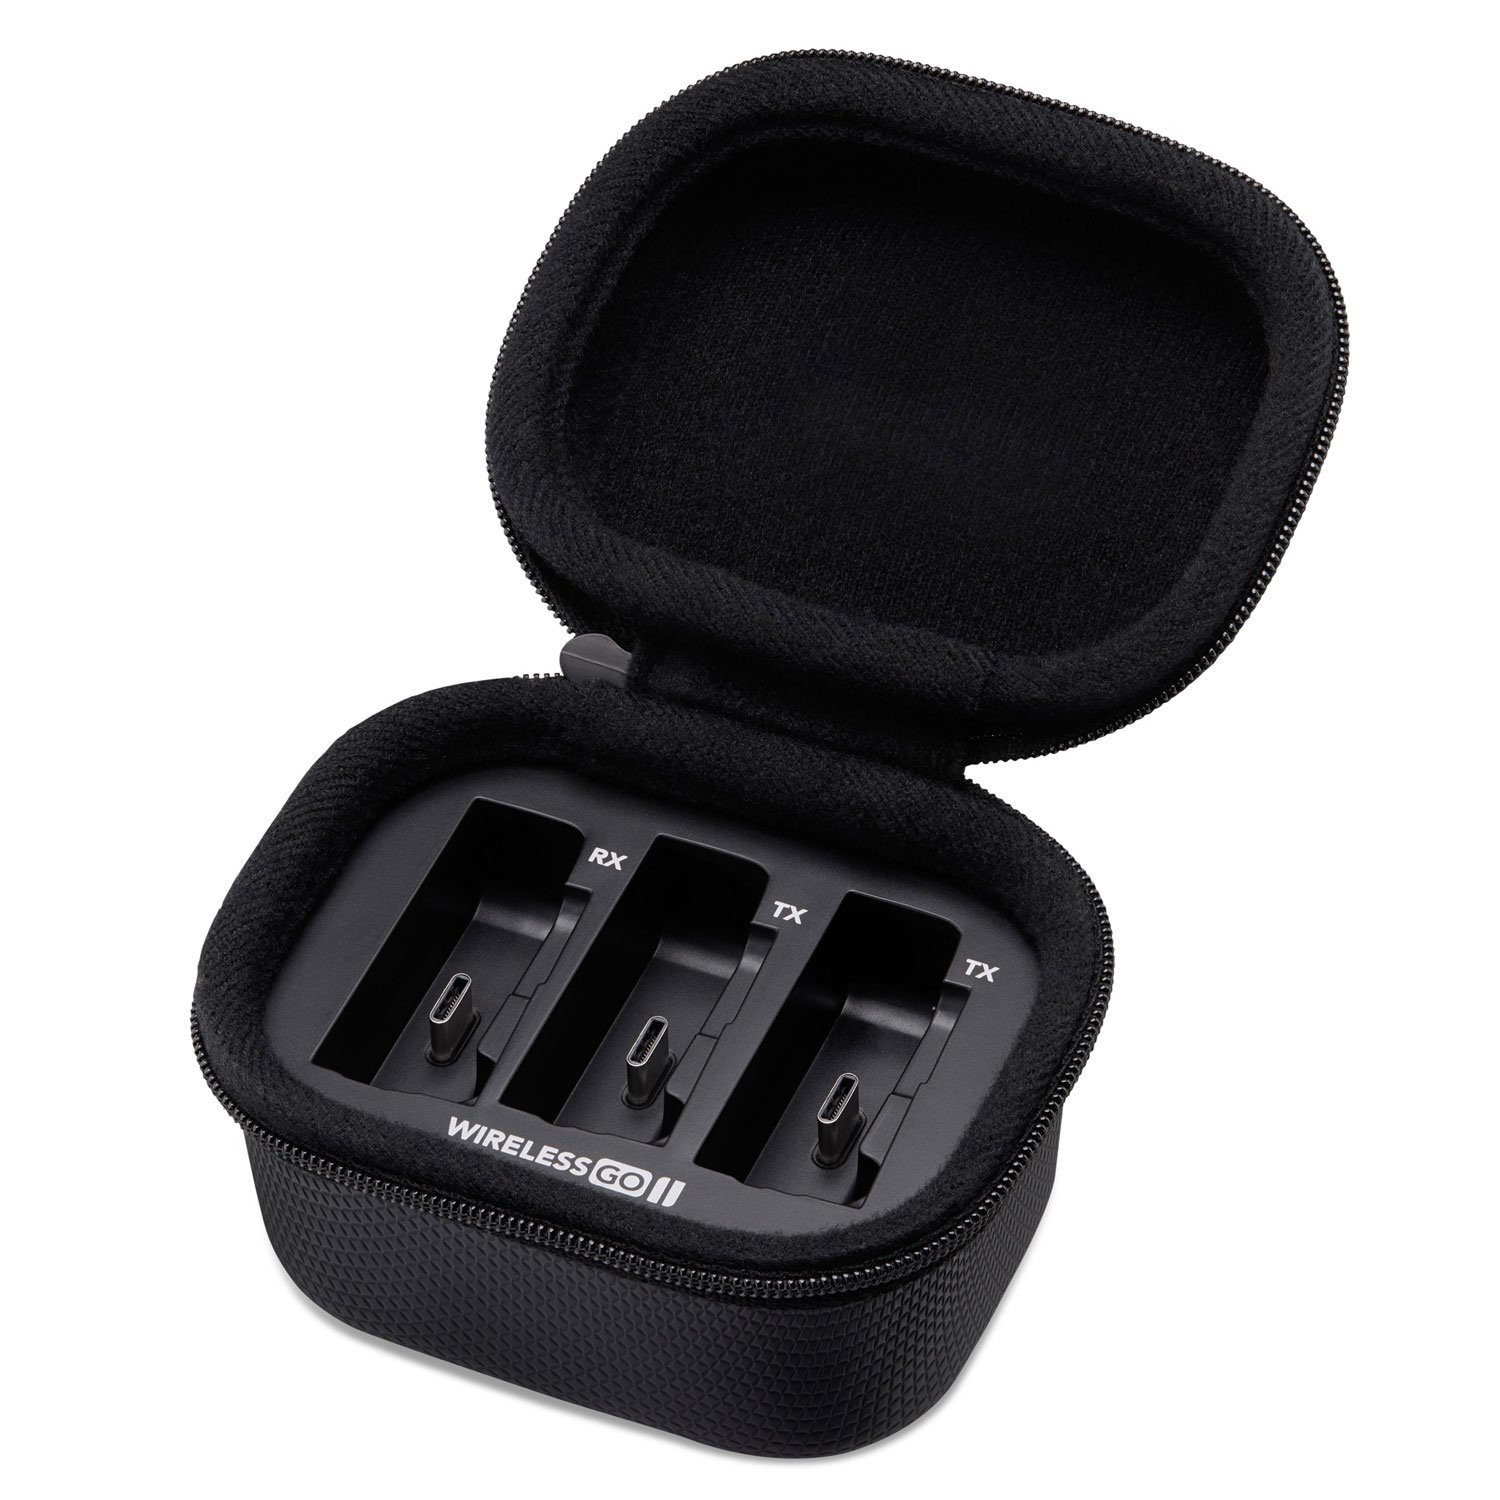 RØDE Mikrofon Wireless GO II Charge Station Lade-Case (Charging Case)